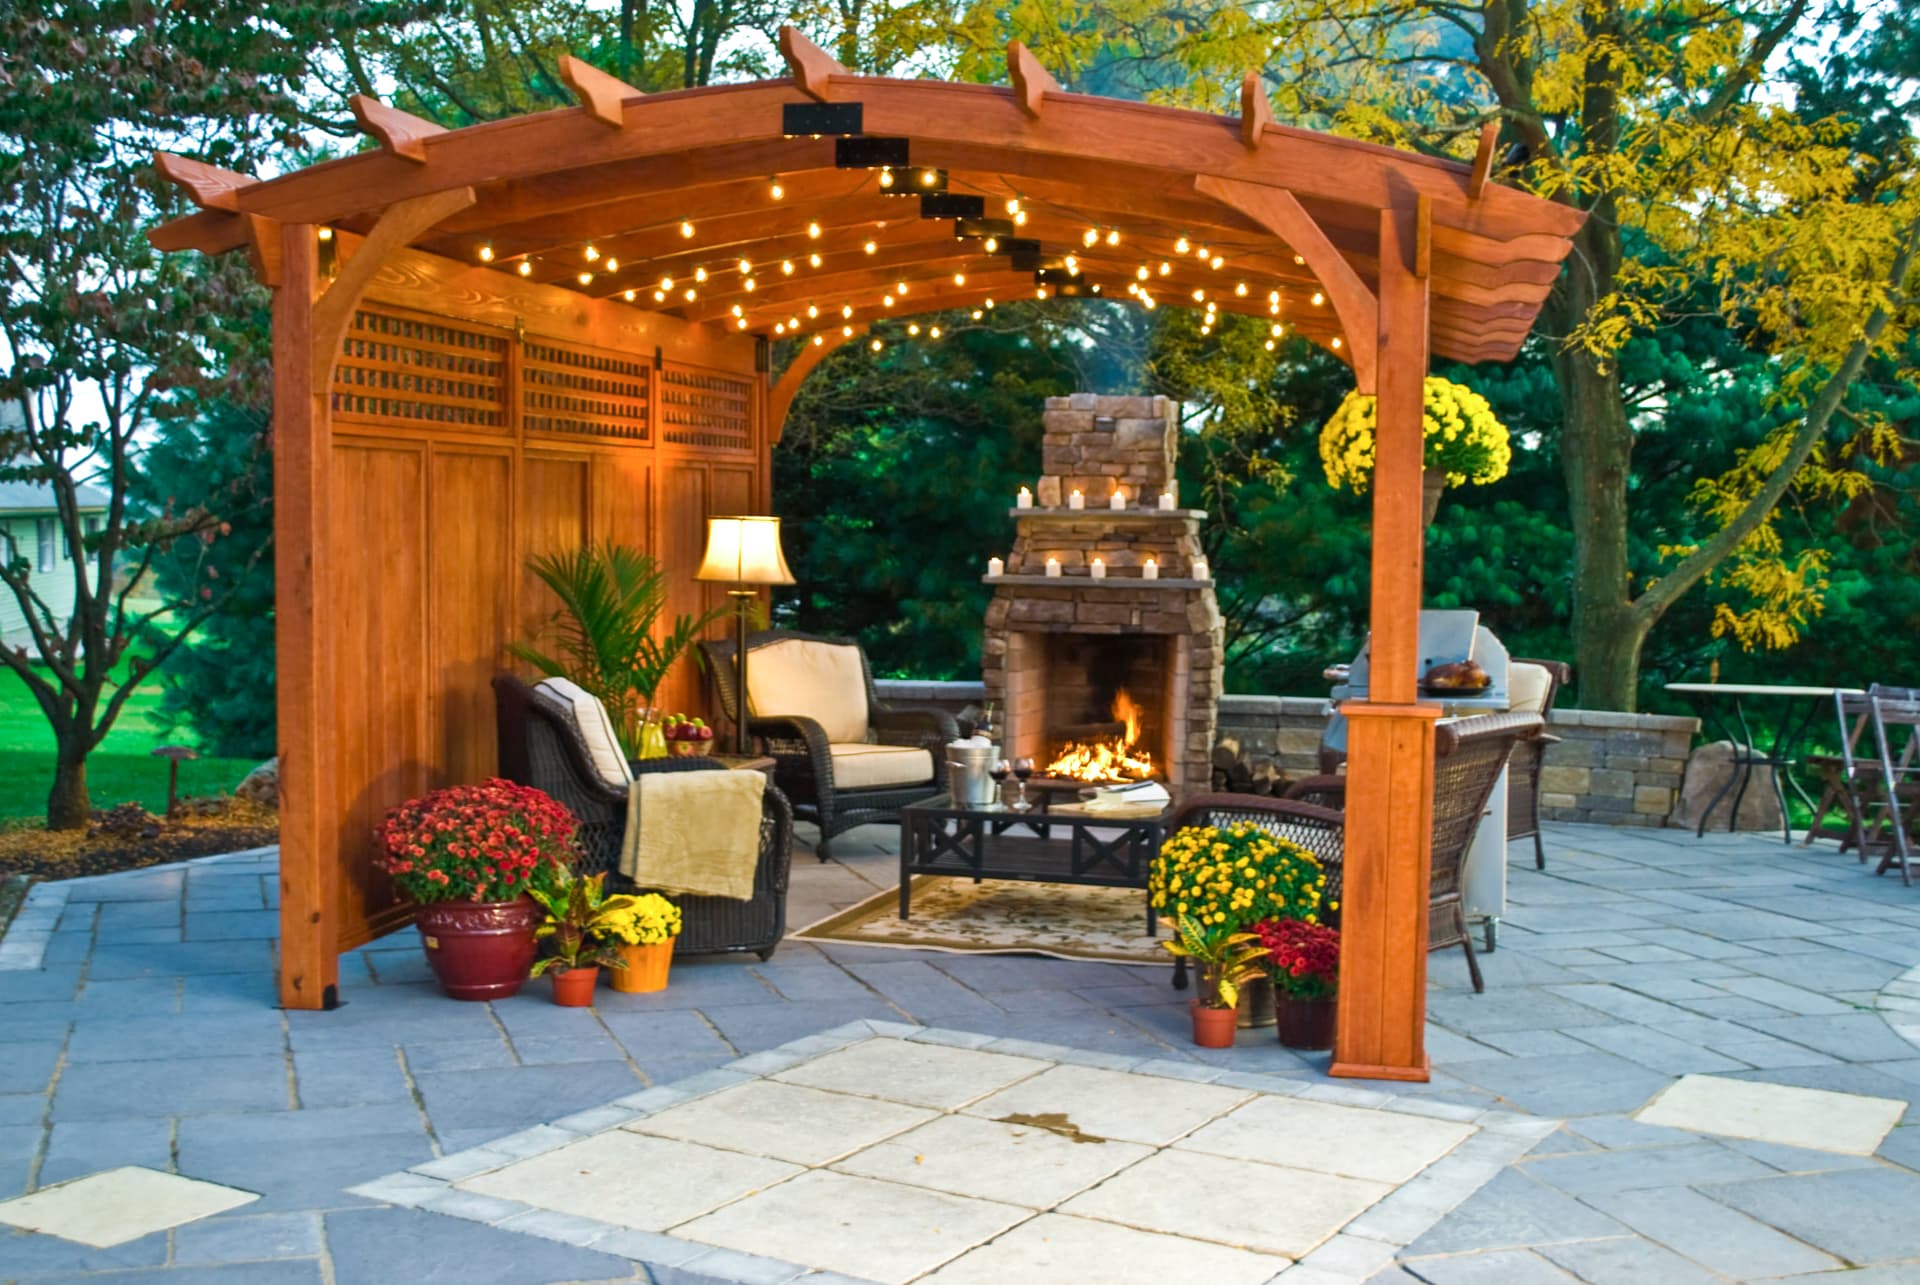 12x17 pergola with curved roof